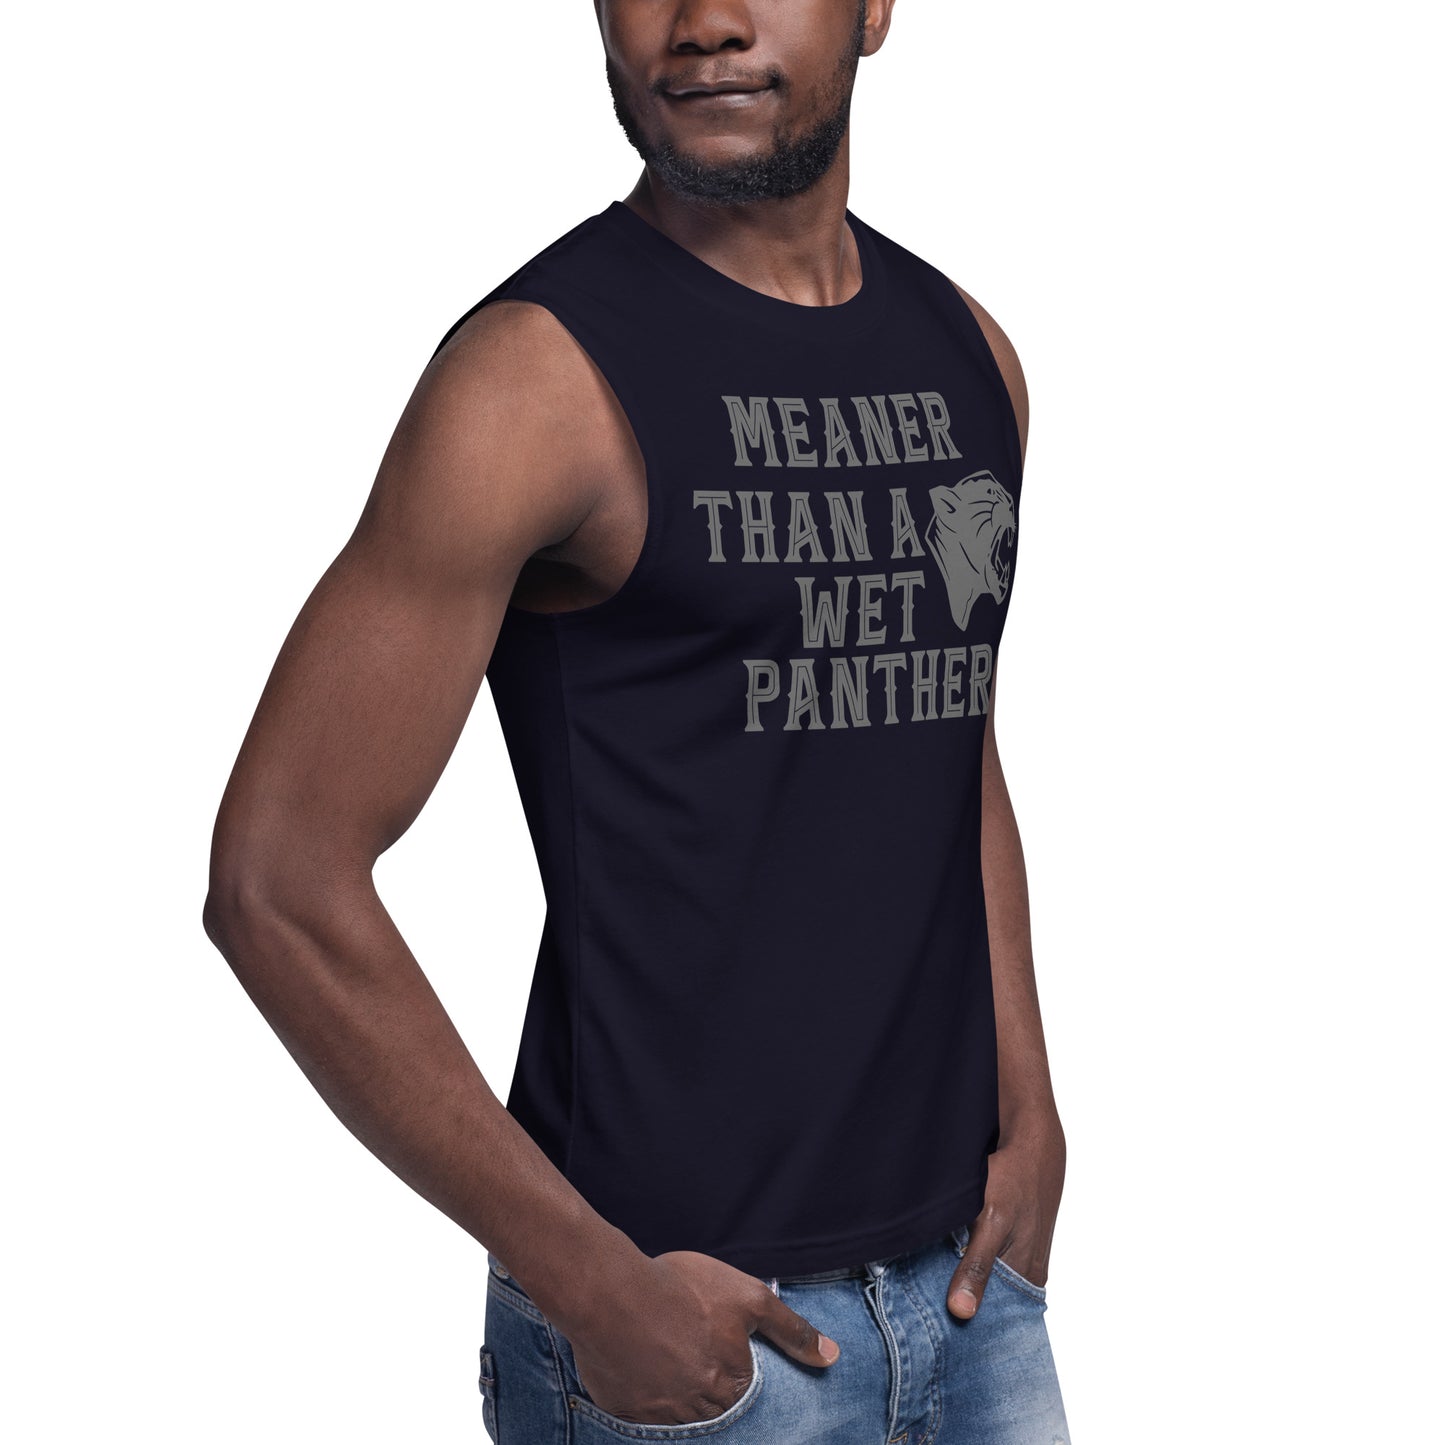 Meaner than a Wet Panther / Unisex Muscle Shirt